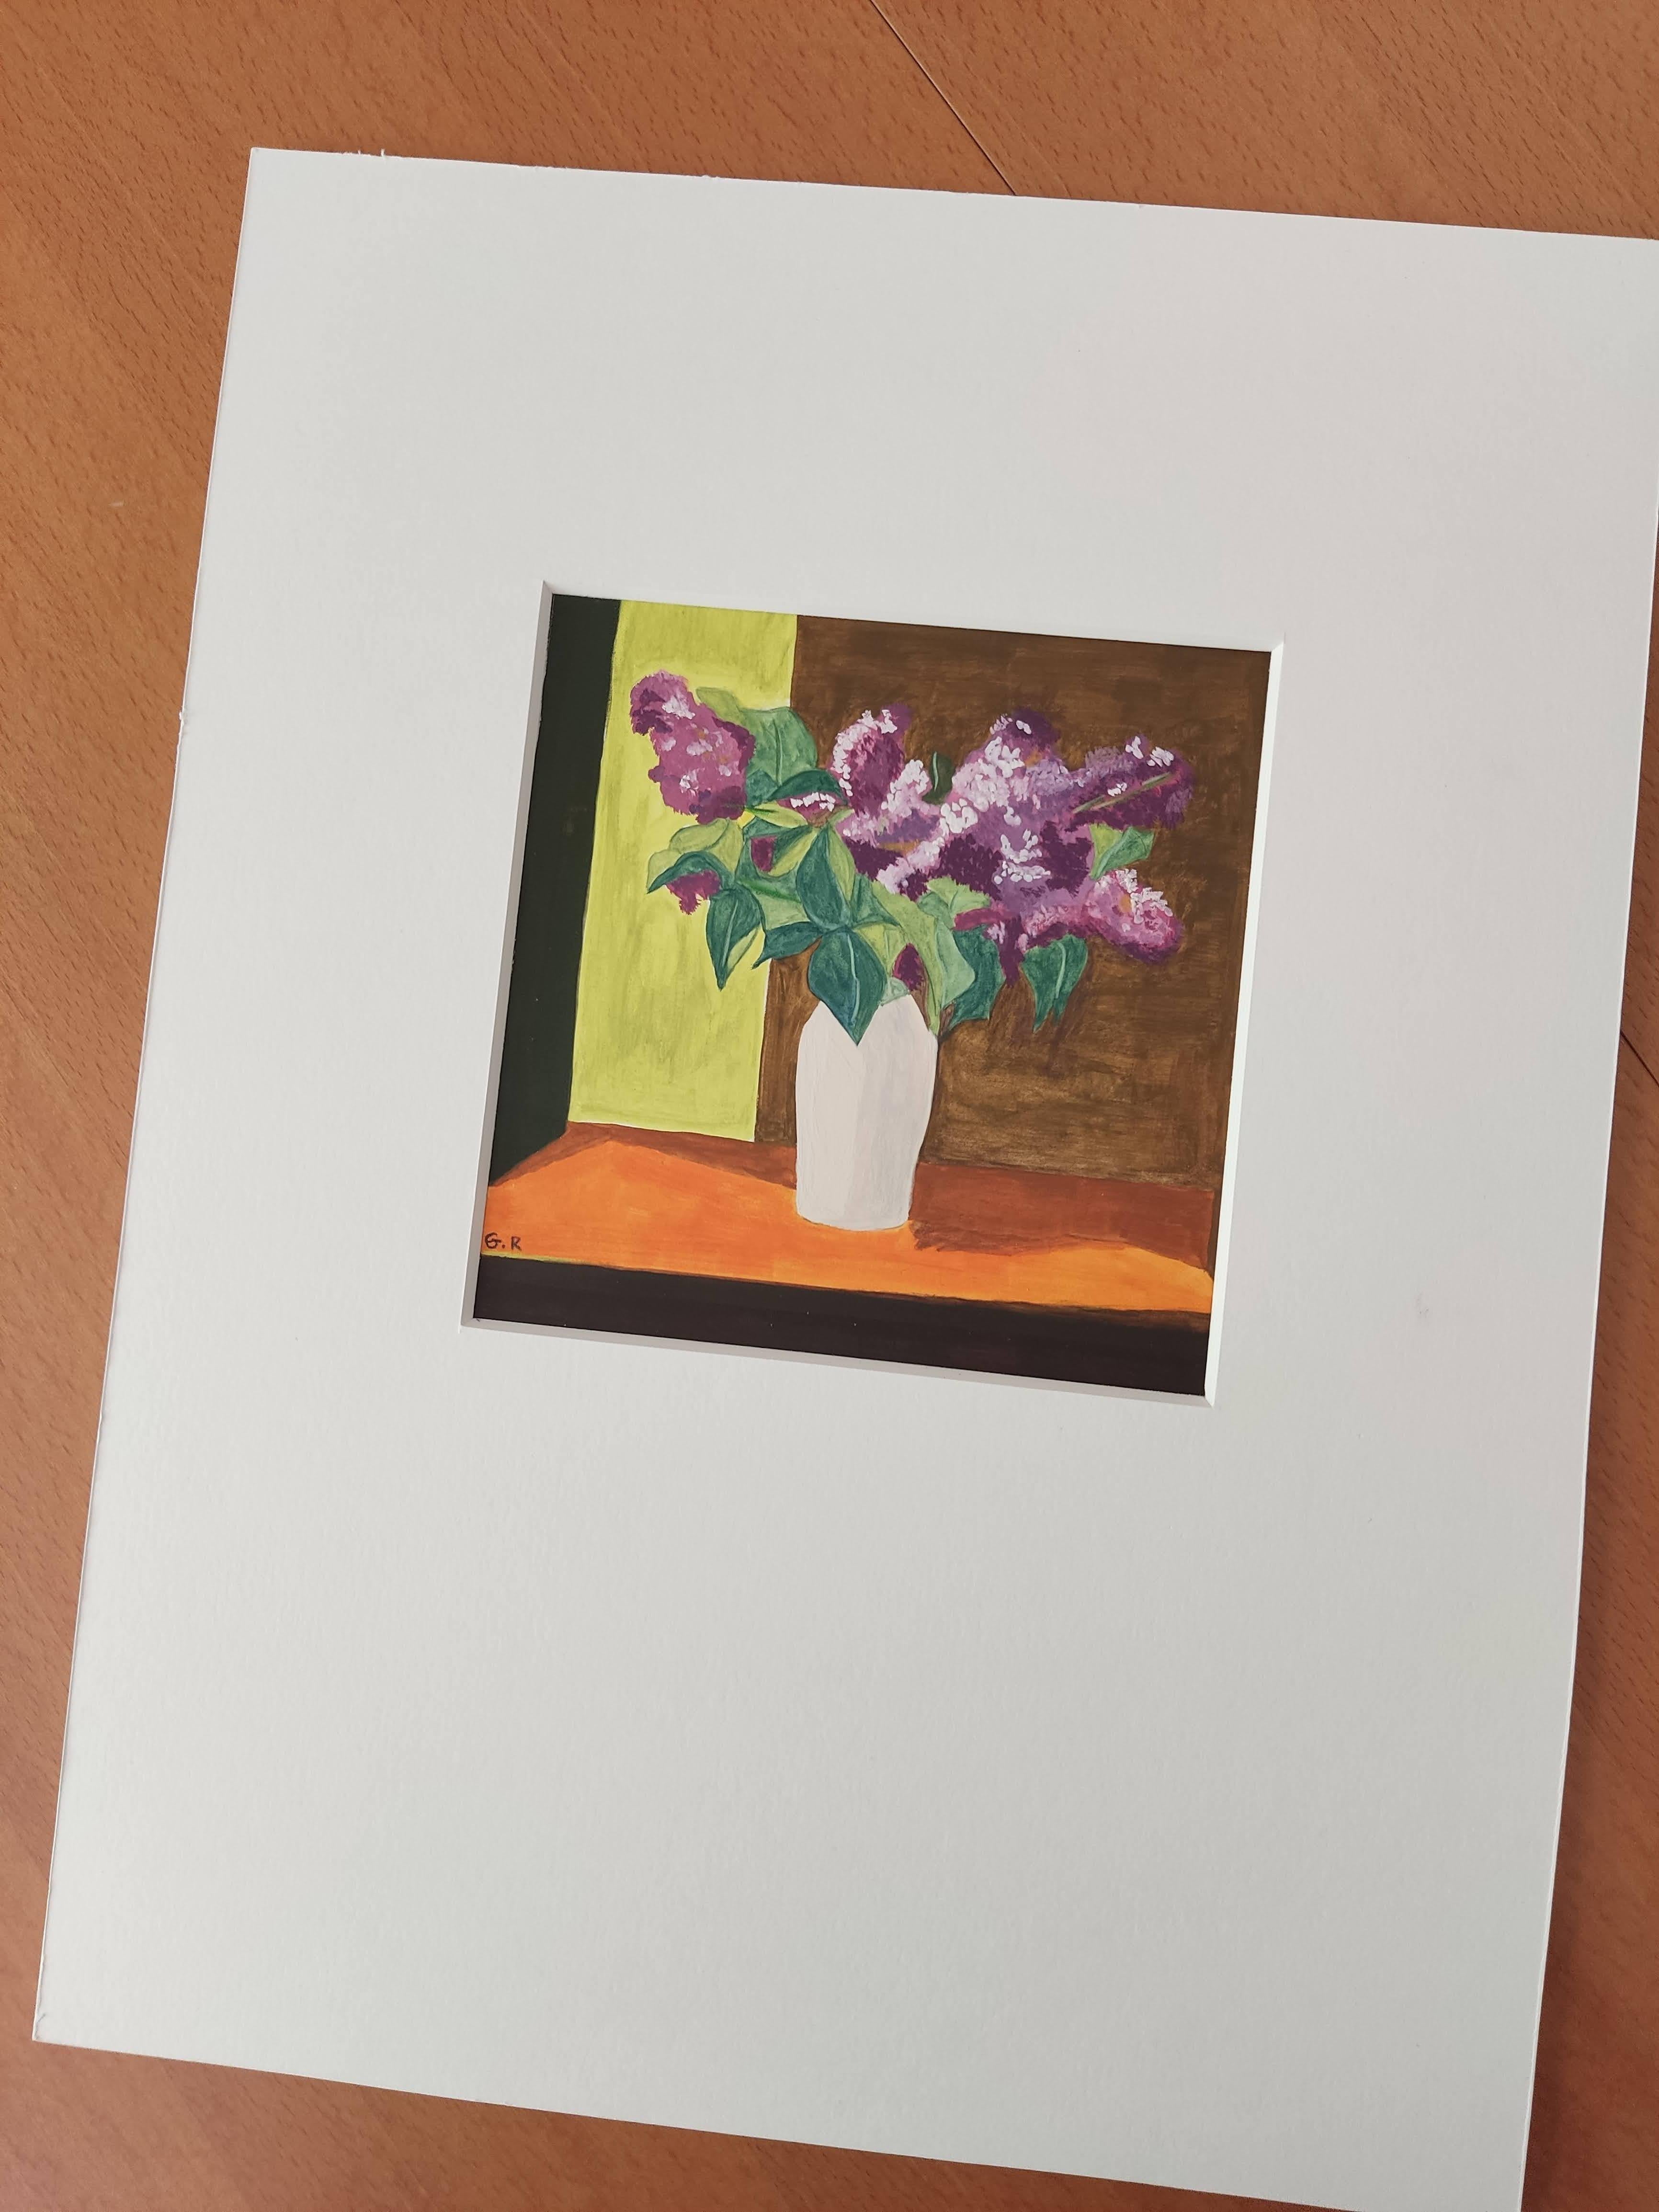 Work :  Original Drawing, Handmade Artwork, Unique Work. The work has been treated with an anti-UV varnish and it is not framed.
Medium : Watercolour on Hahnemühle Fine Art paper 300Gsm
Artist : Gabriel Riesnert
Subject /Title: Un petit bouquet de